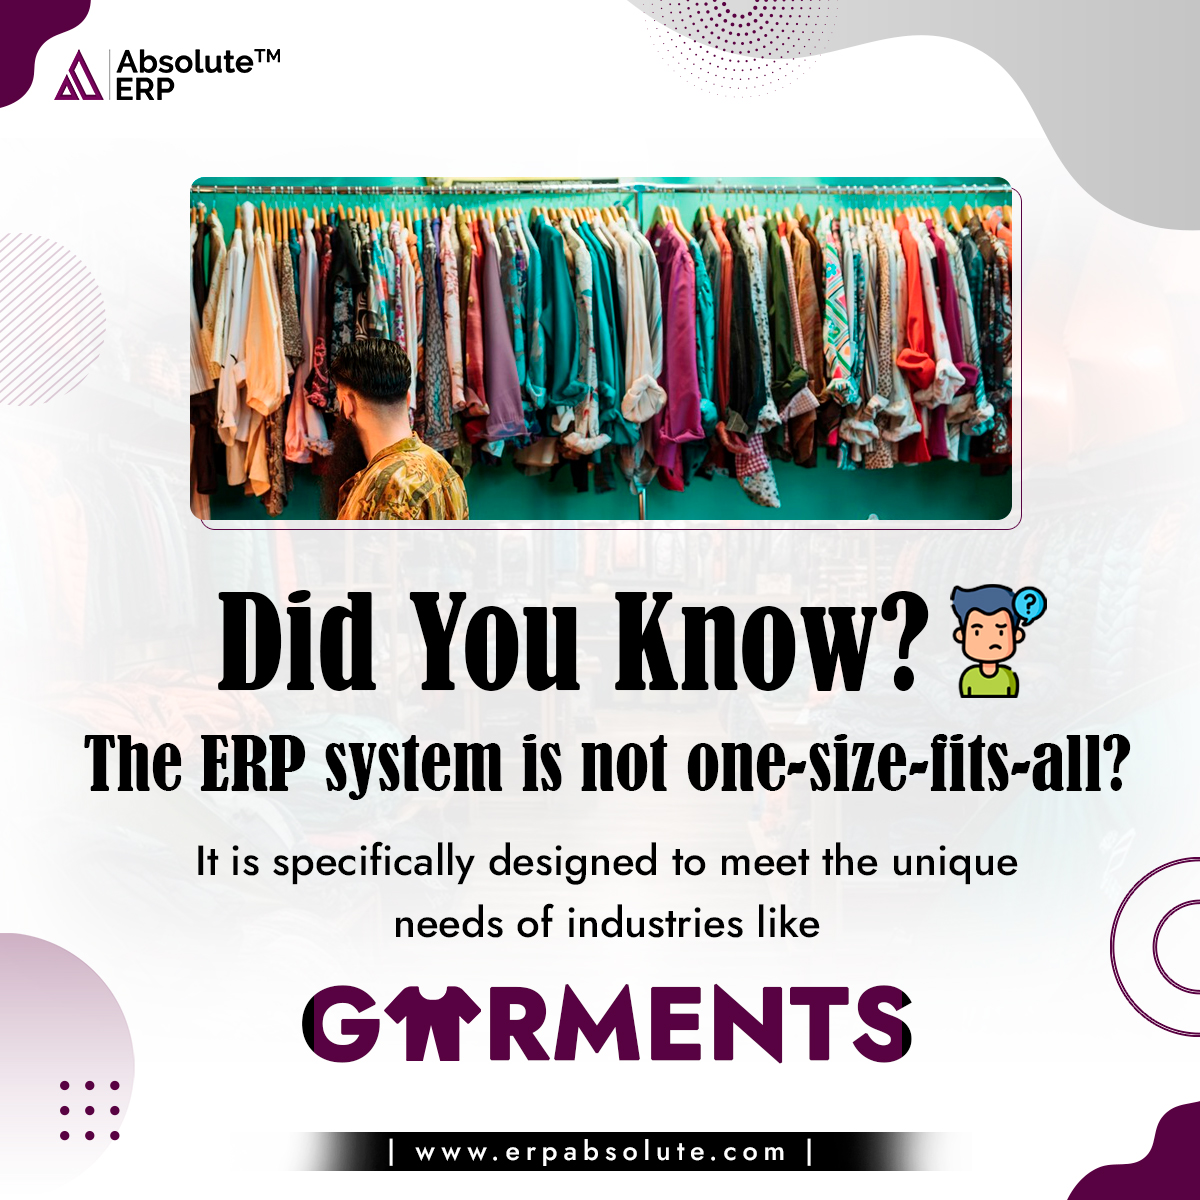 Get your unique needs fulfilled with the best ERP software. Learn more- shorturl.at/hKOQ1
#garmentindistry #absoluteerp #besterpsoftware #garmentsmanufacturingerp #erpsystem #Garments #erp #sap  #garmenterpsoftware #garmentmanufacturingsoftware #erpsoftware